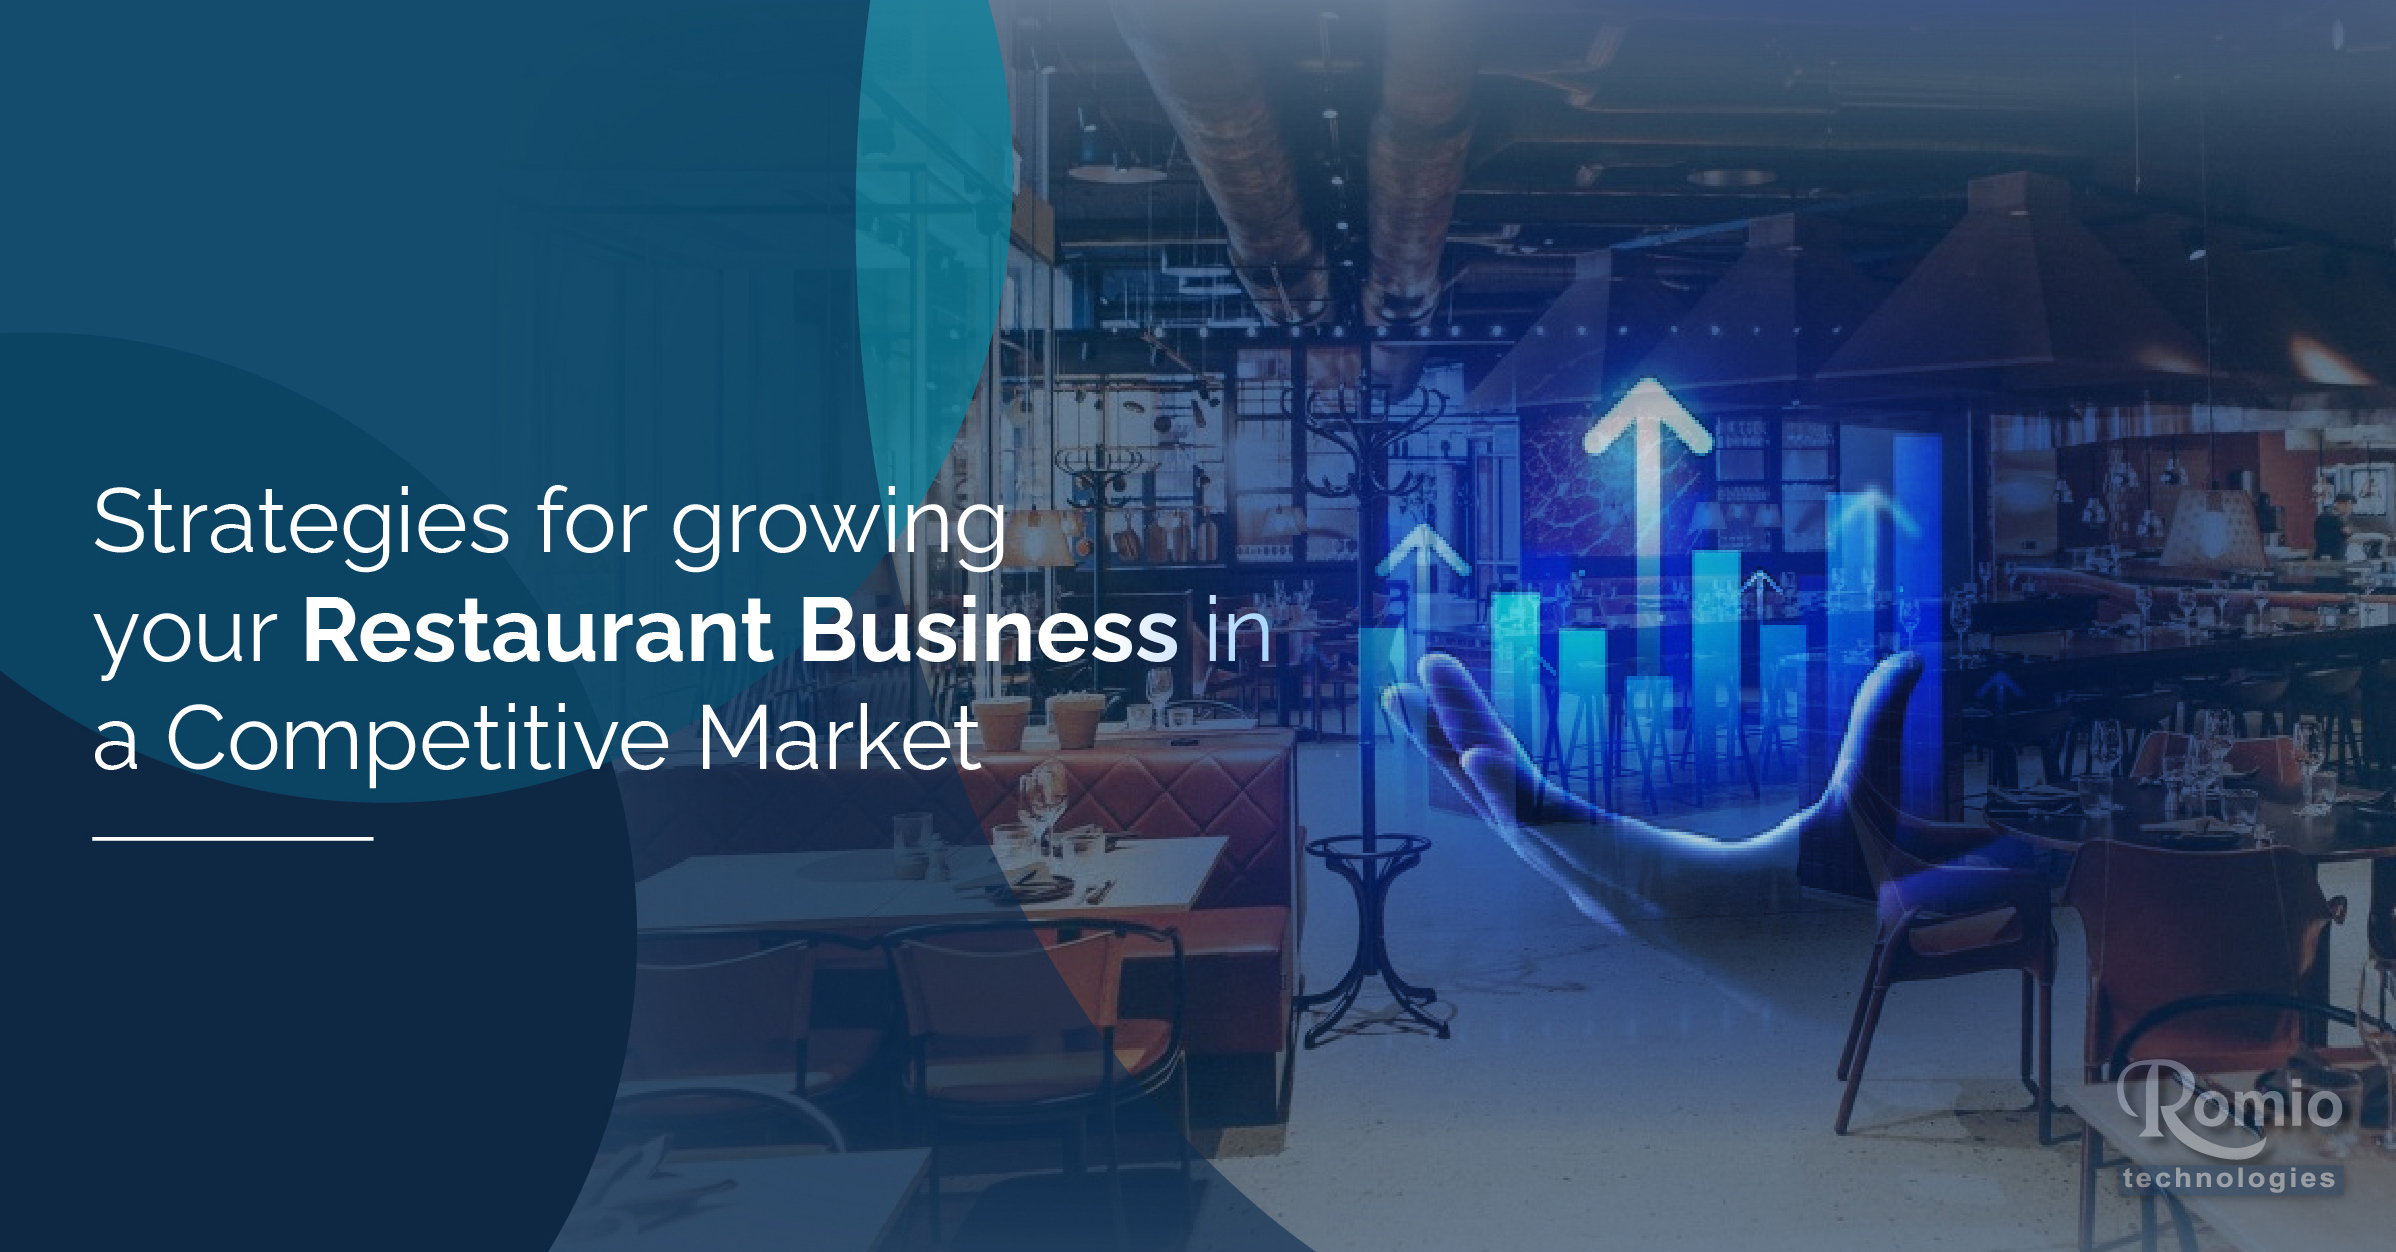 Strategies for Growing Your Restaurant Business in a Competitive Market